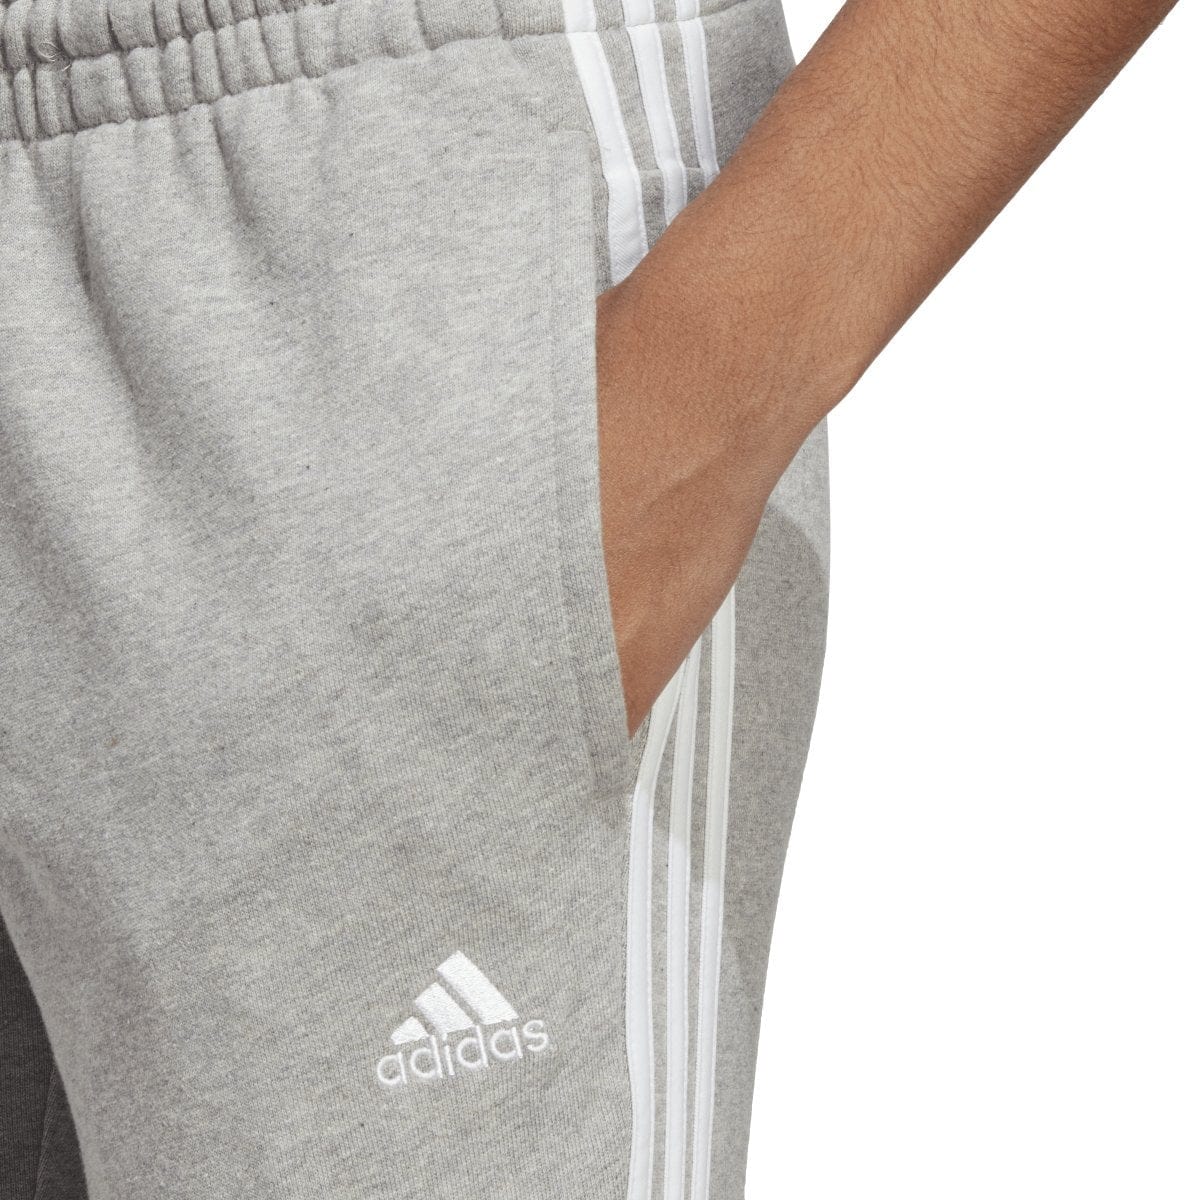 Adidas ADIDAS WOMEN'S ESSENTIALS 3-STRIPES FRENCH TERRY CUFFED GREY TRACKPANTS - INSPORT